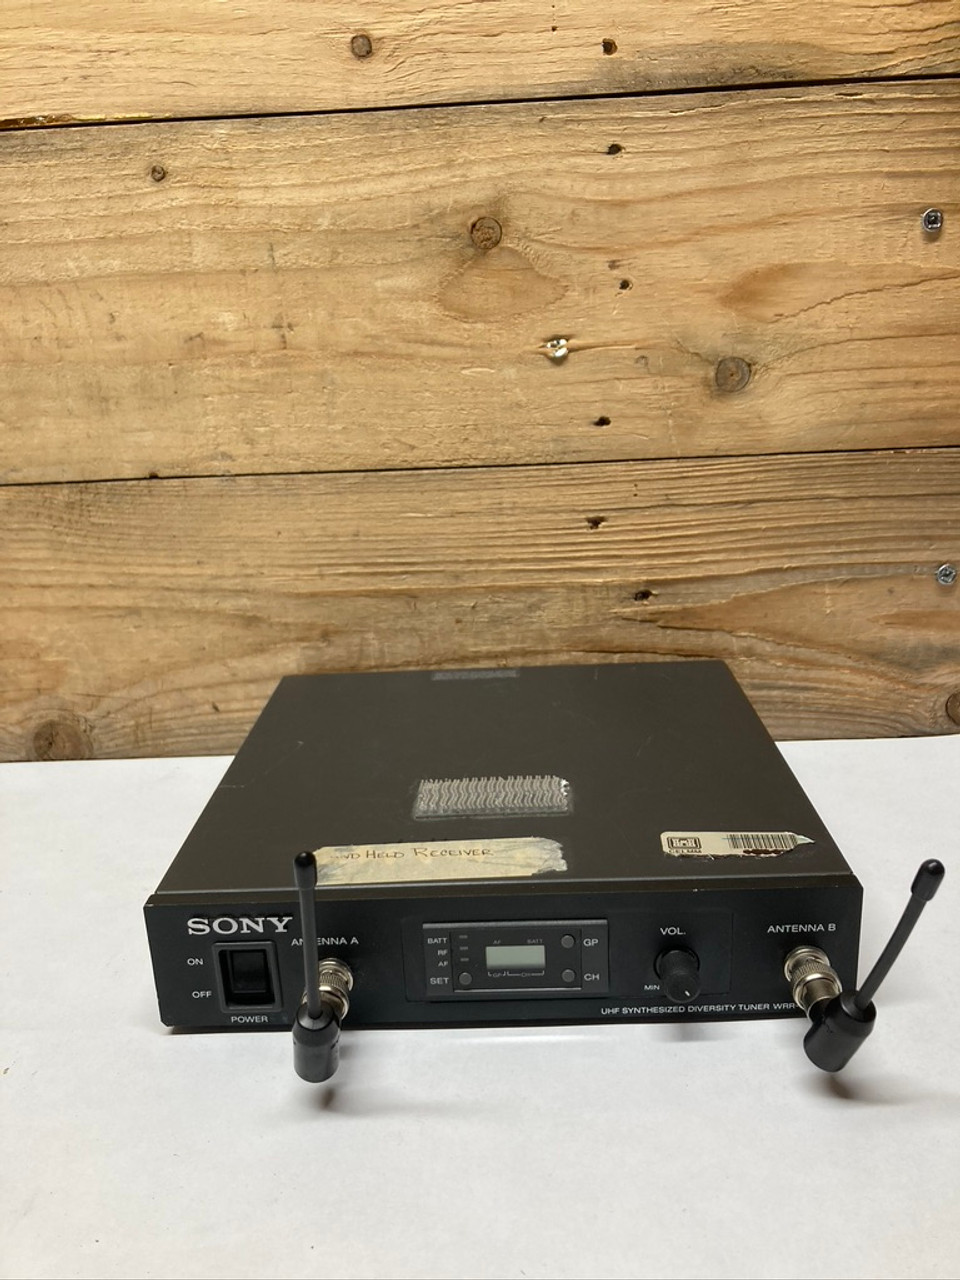 UHF Synthesized Wireless Diversity Tuner WRR-800A Sony